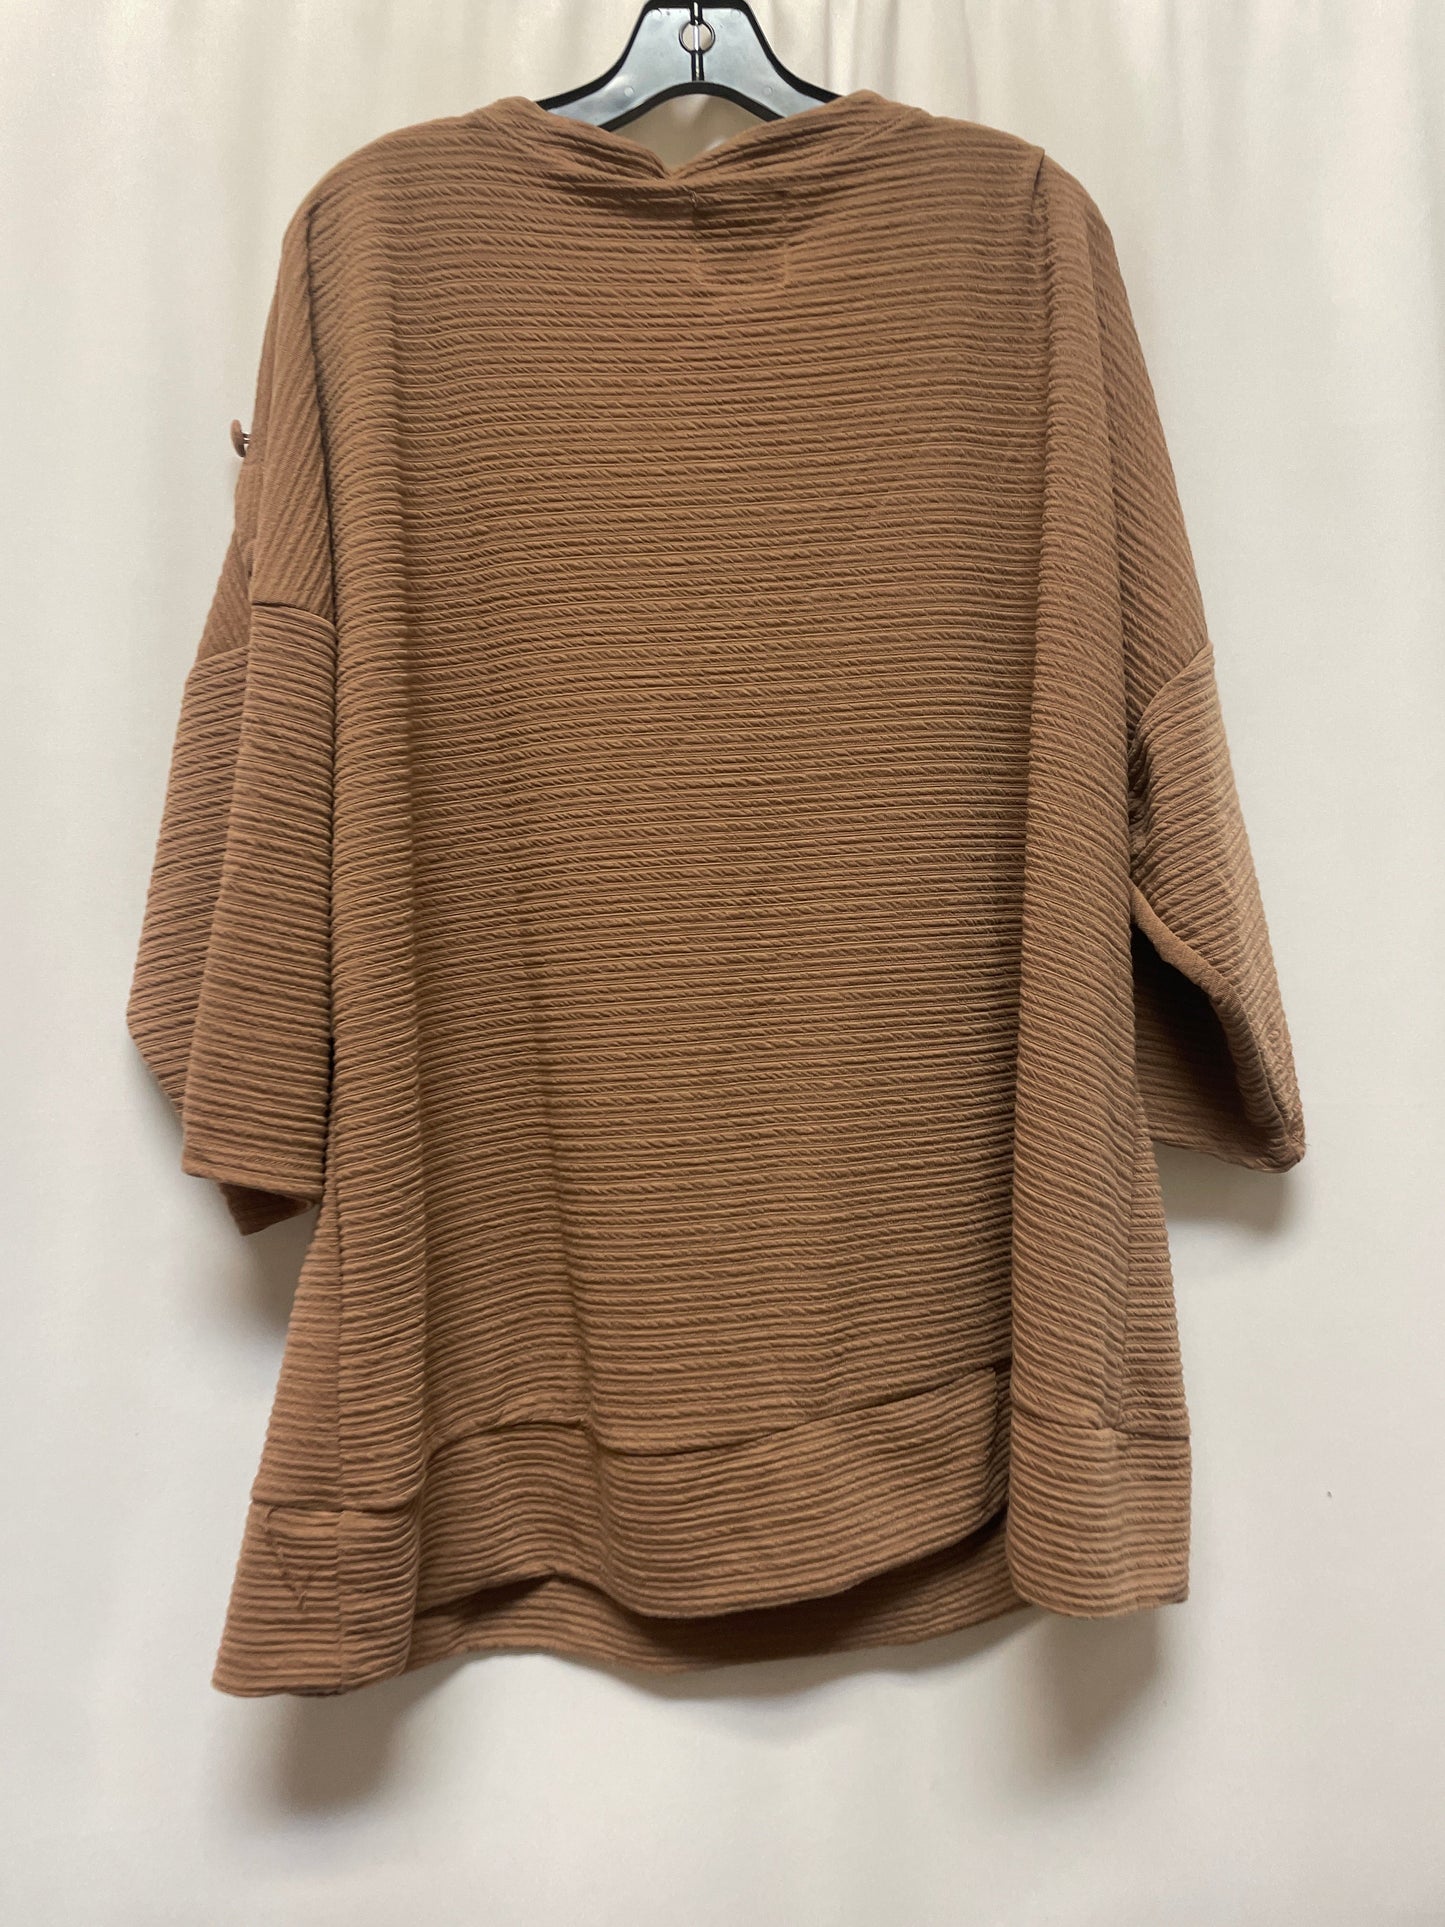 Brown Top 3/4 Sleeve New York Laundry, Size 3x